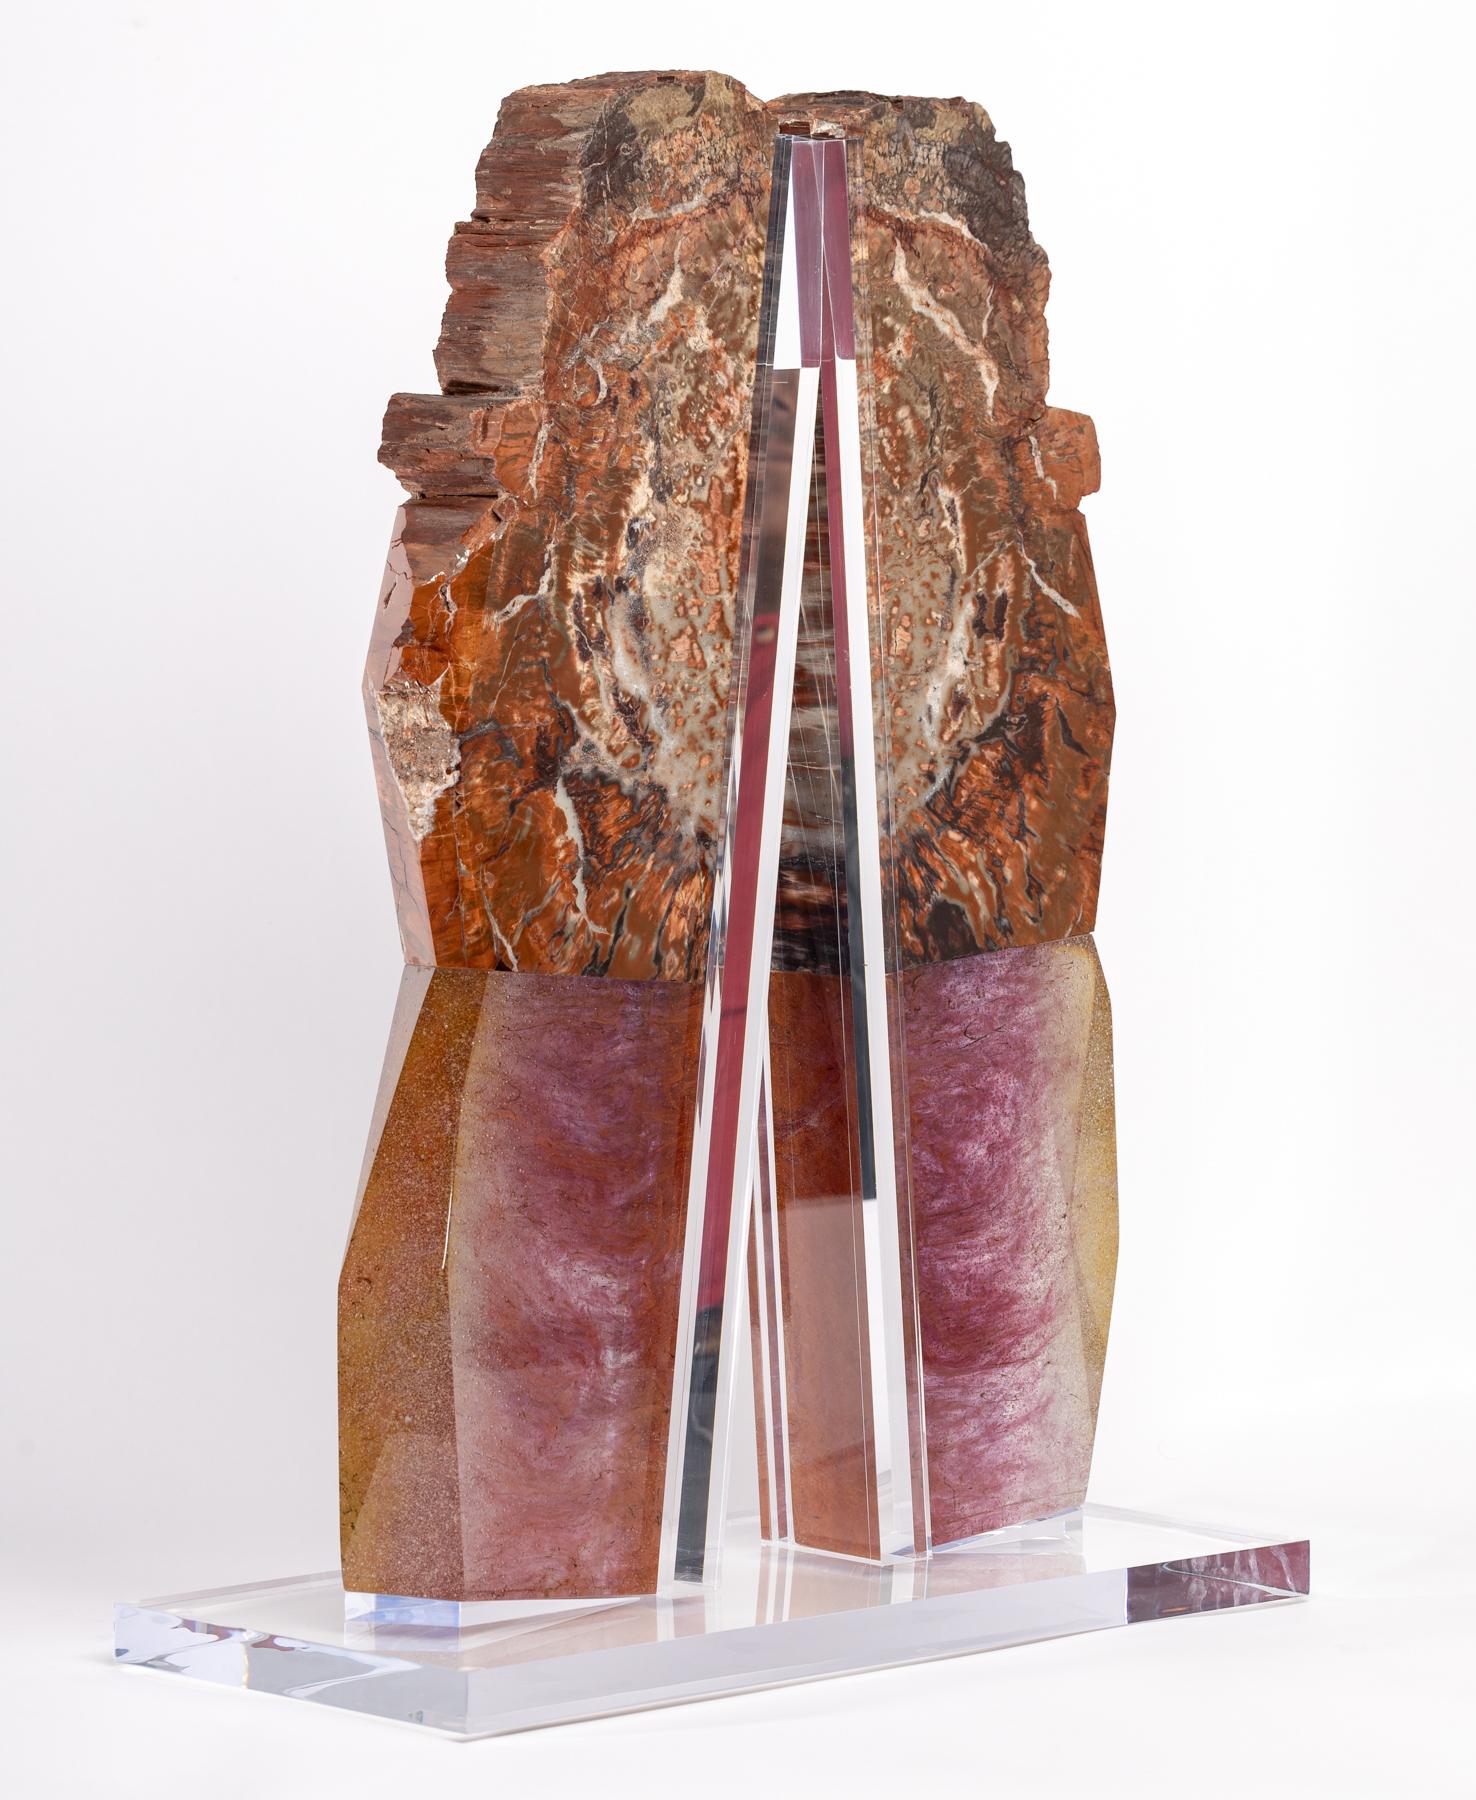 Mexican Arizona Petrified Wood and Boil Glass fusion Sculpture